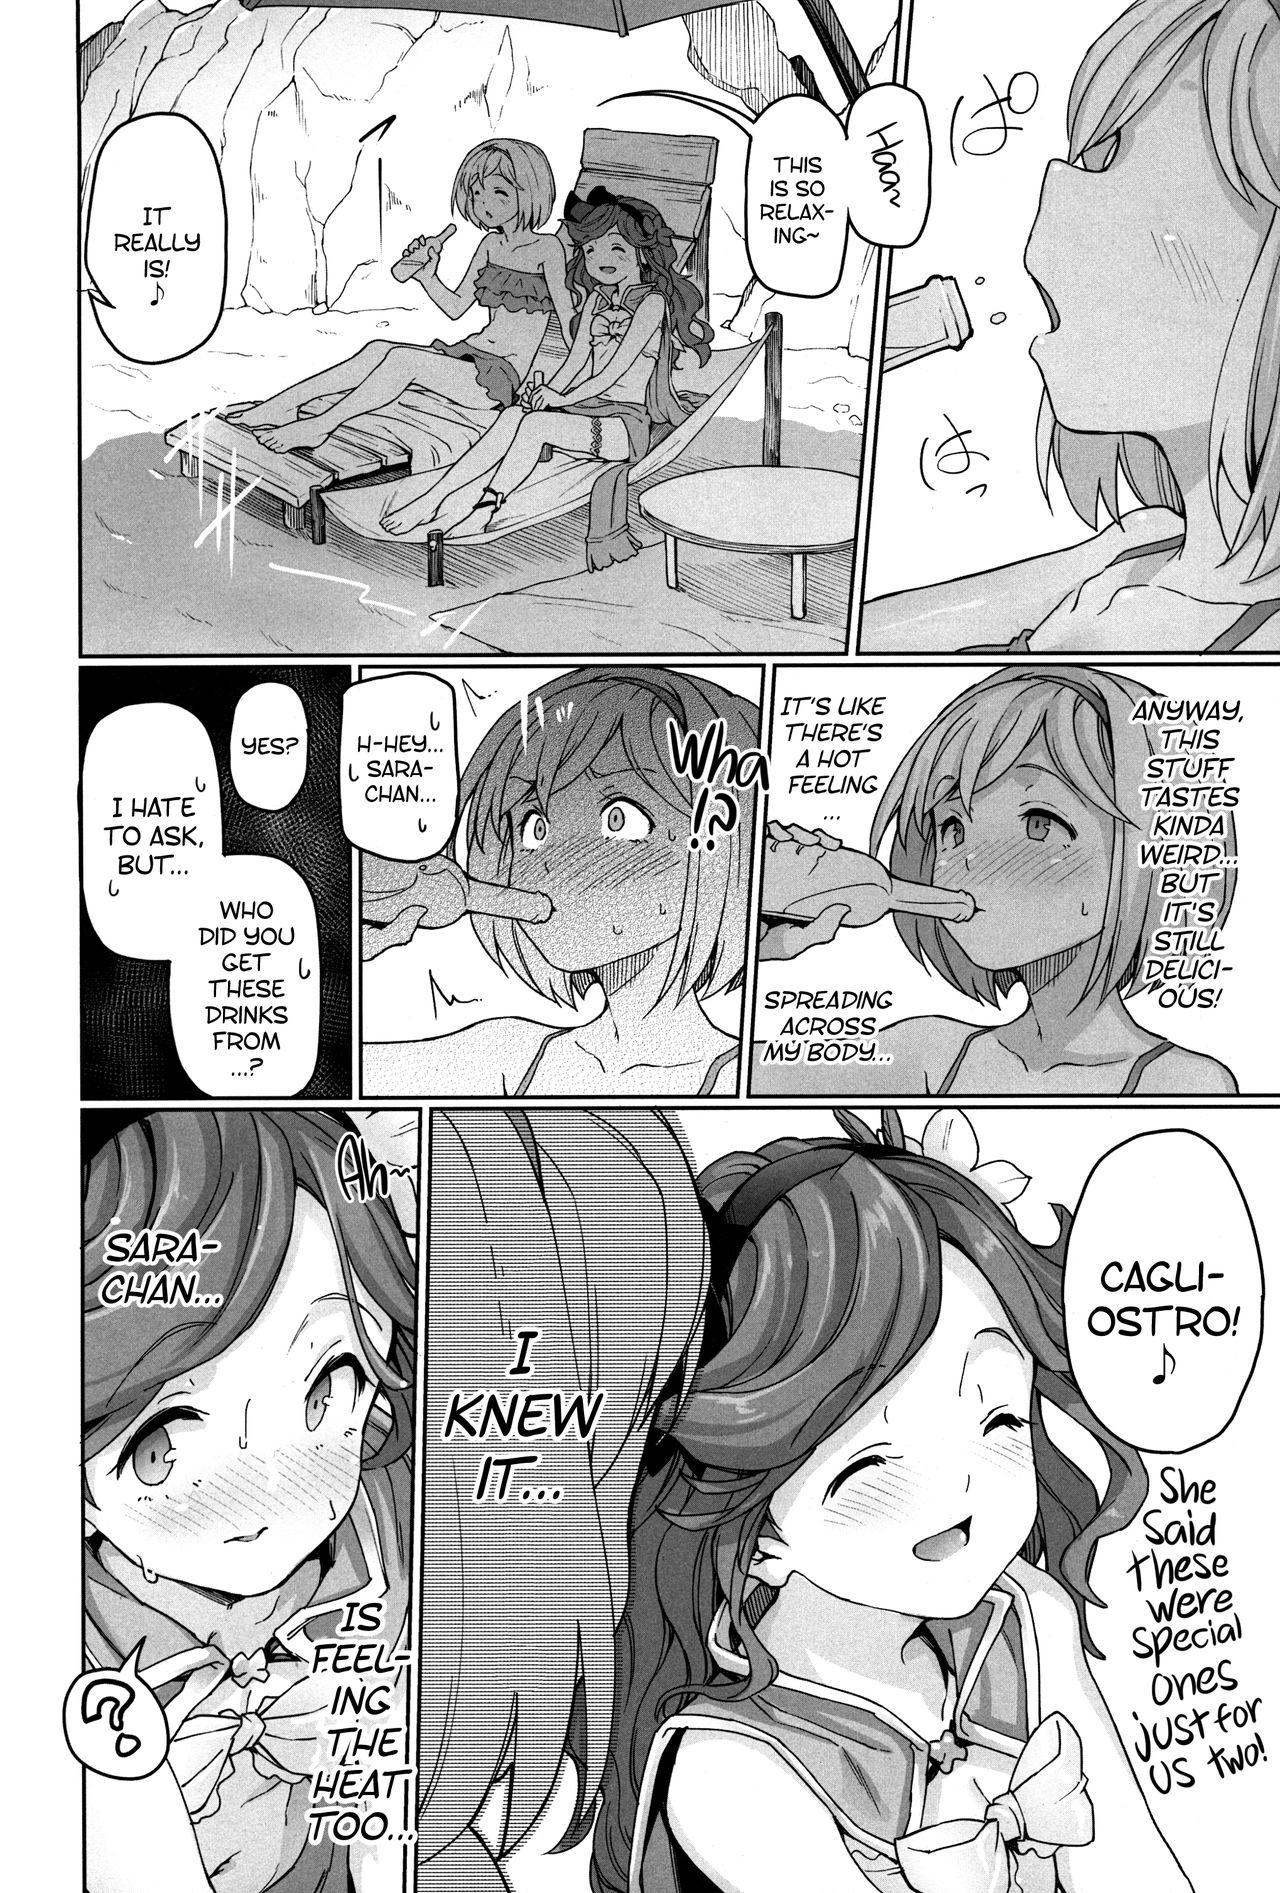 Fucking Pussy Sunagami no Komachi Angel? | A Town Beauty Angel of the Dunes? - Granblue fantasy Class - Page 5